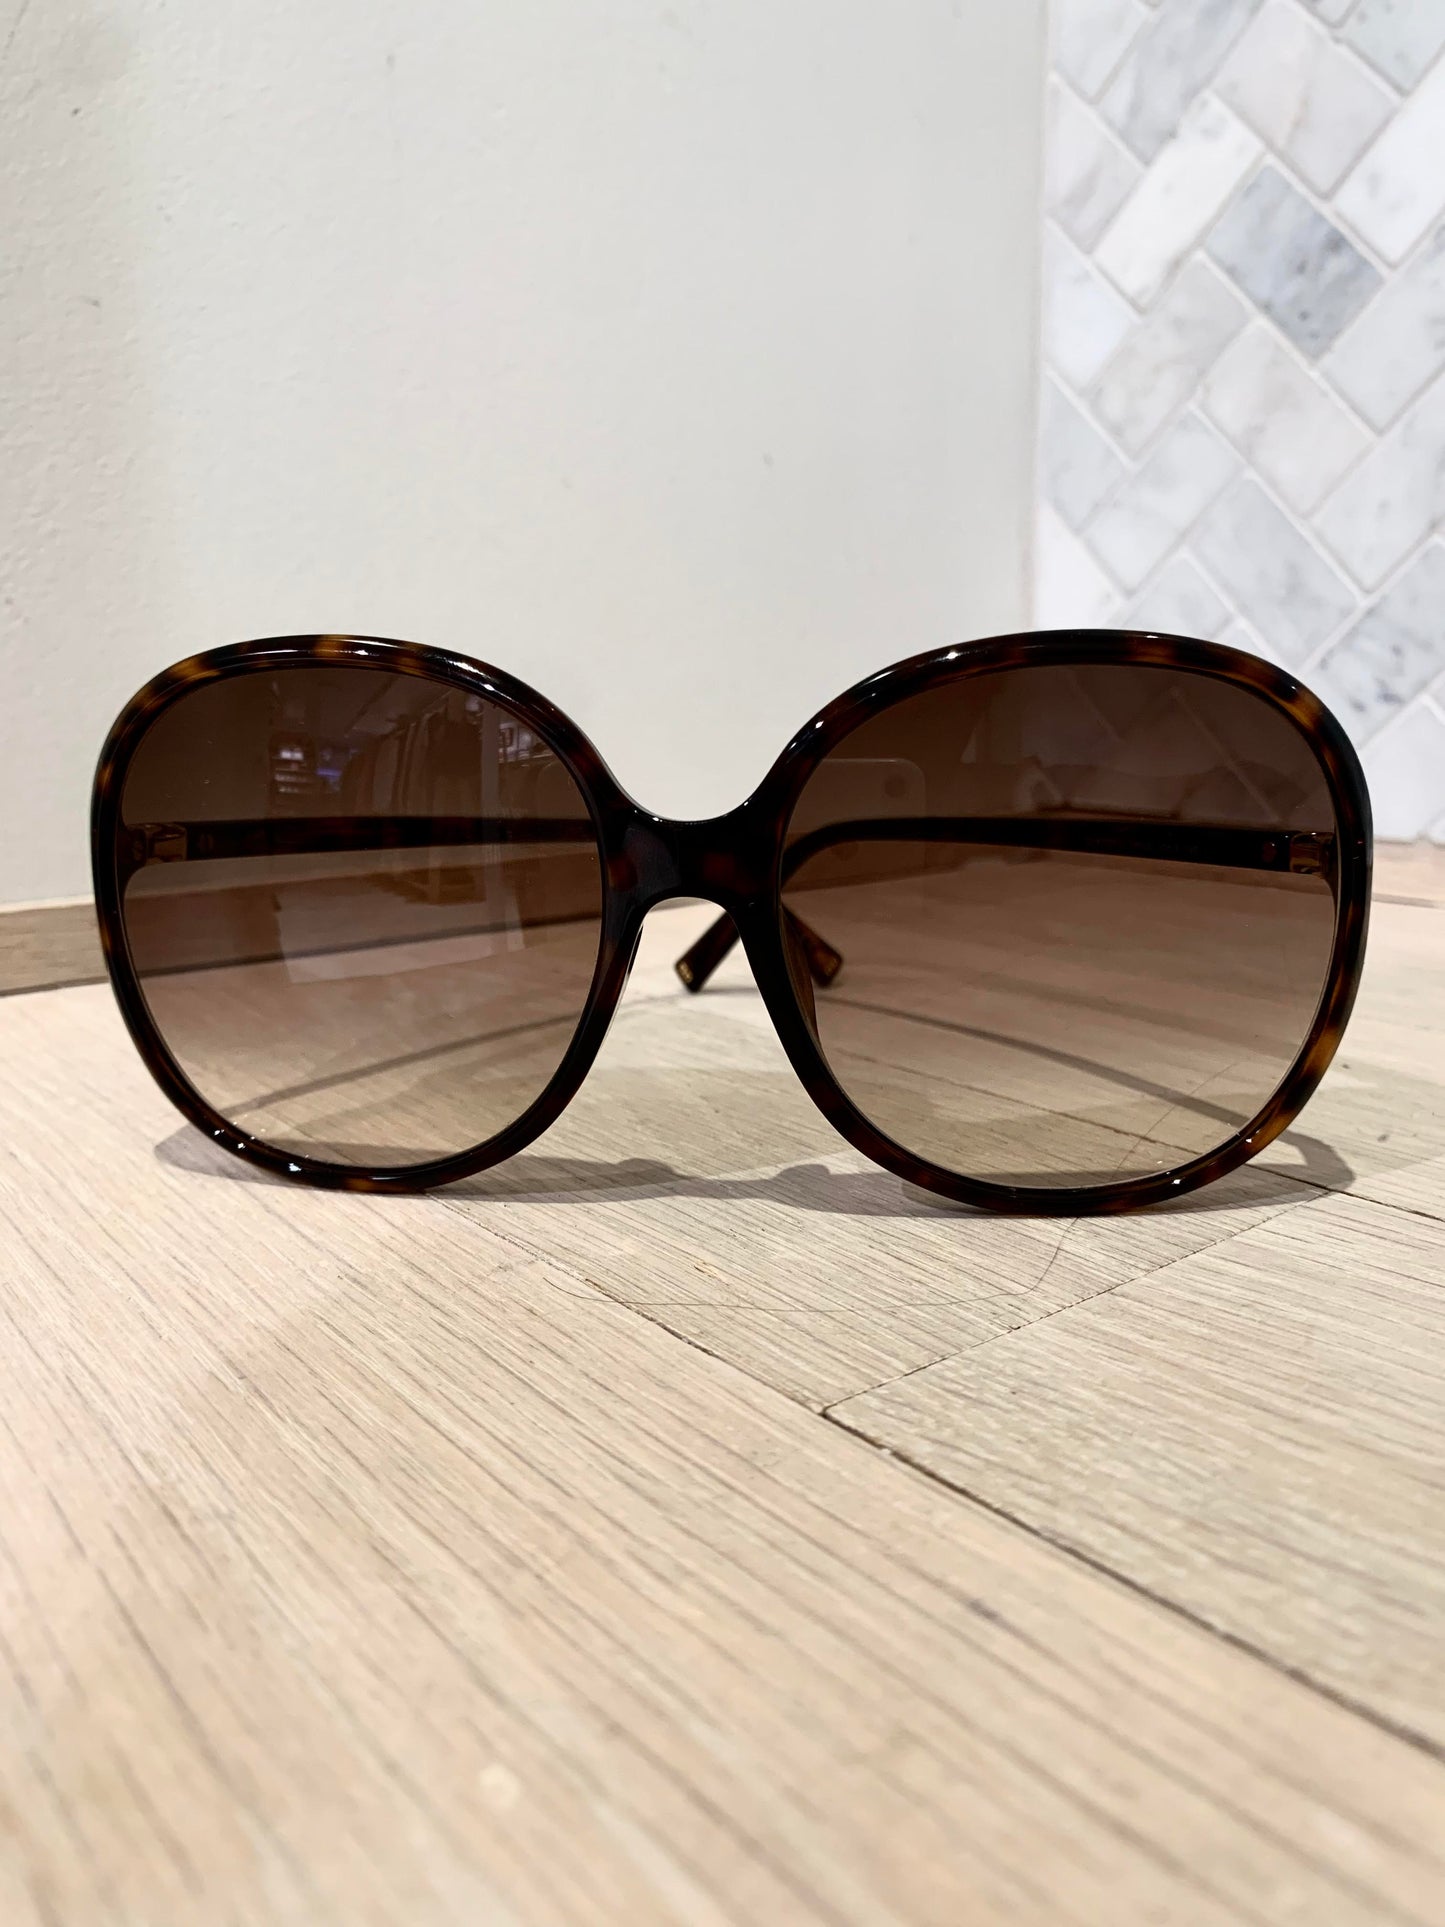 GIVENCHY - SUNGLASSES - ROUND OVERSIZE (2 Colors)